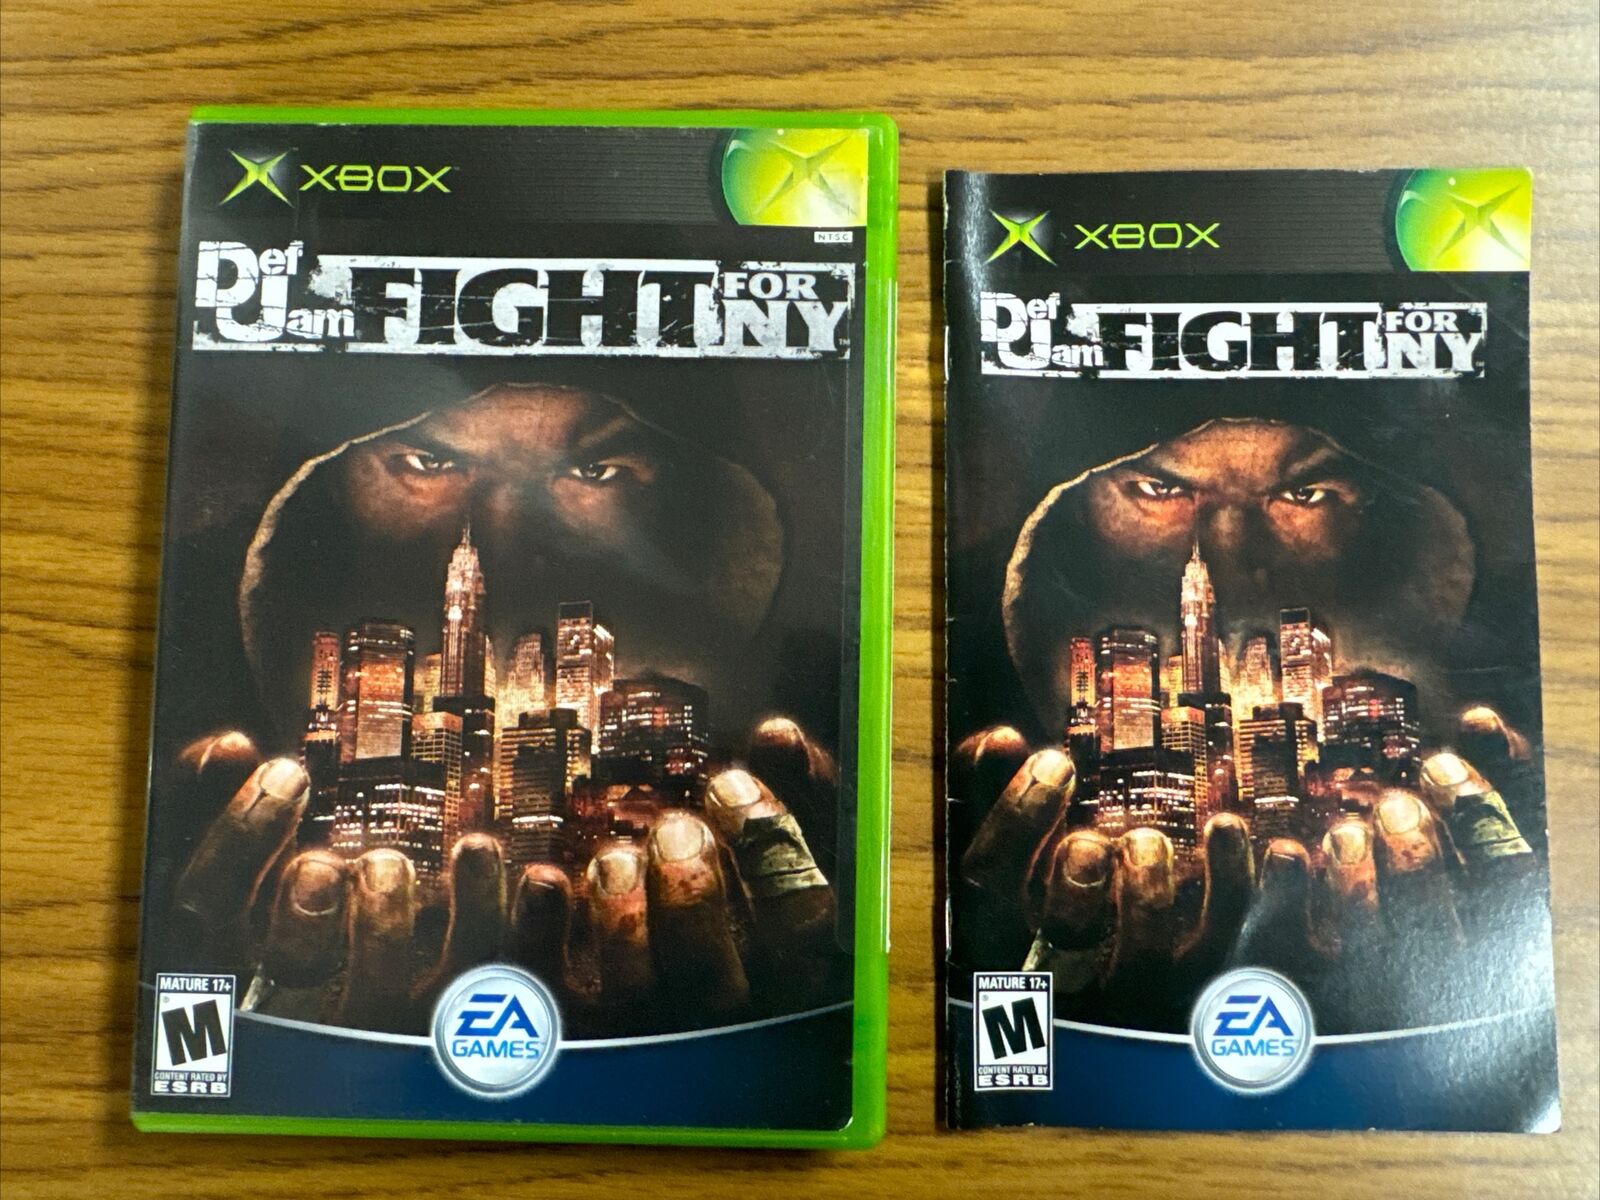 Def Jam Fight For NY (Microsoft Xbox, 2004) Complete CIB TESTED & WORKING Nice!